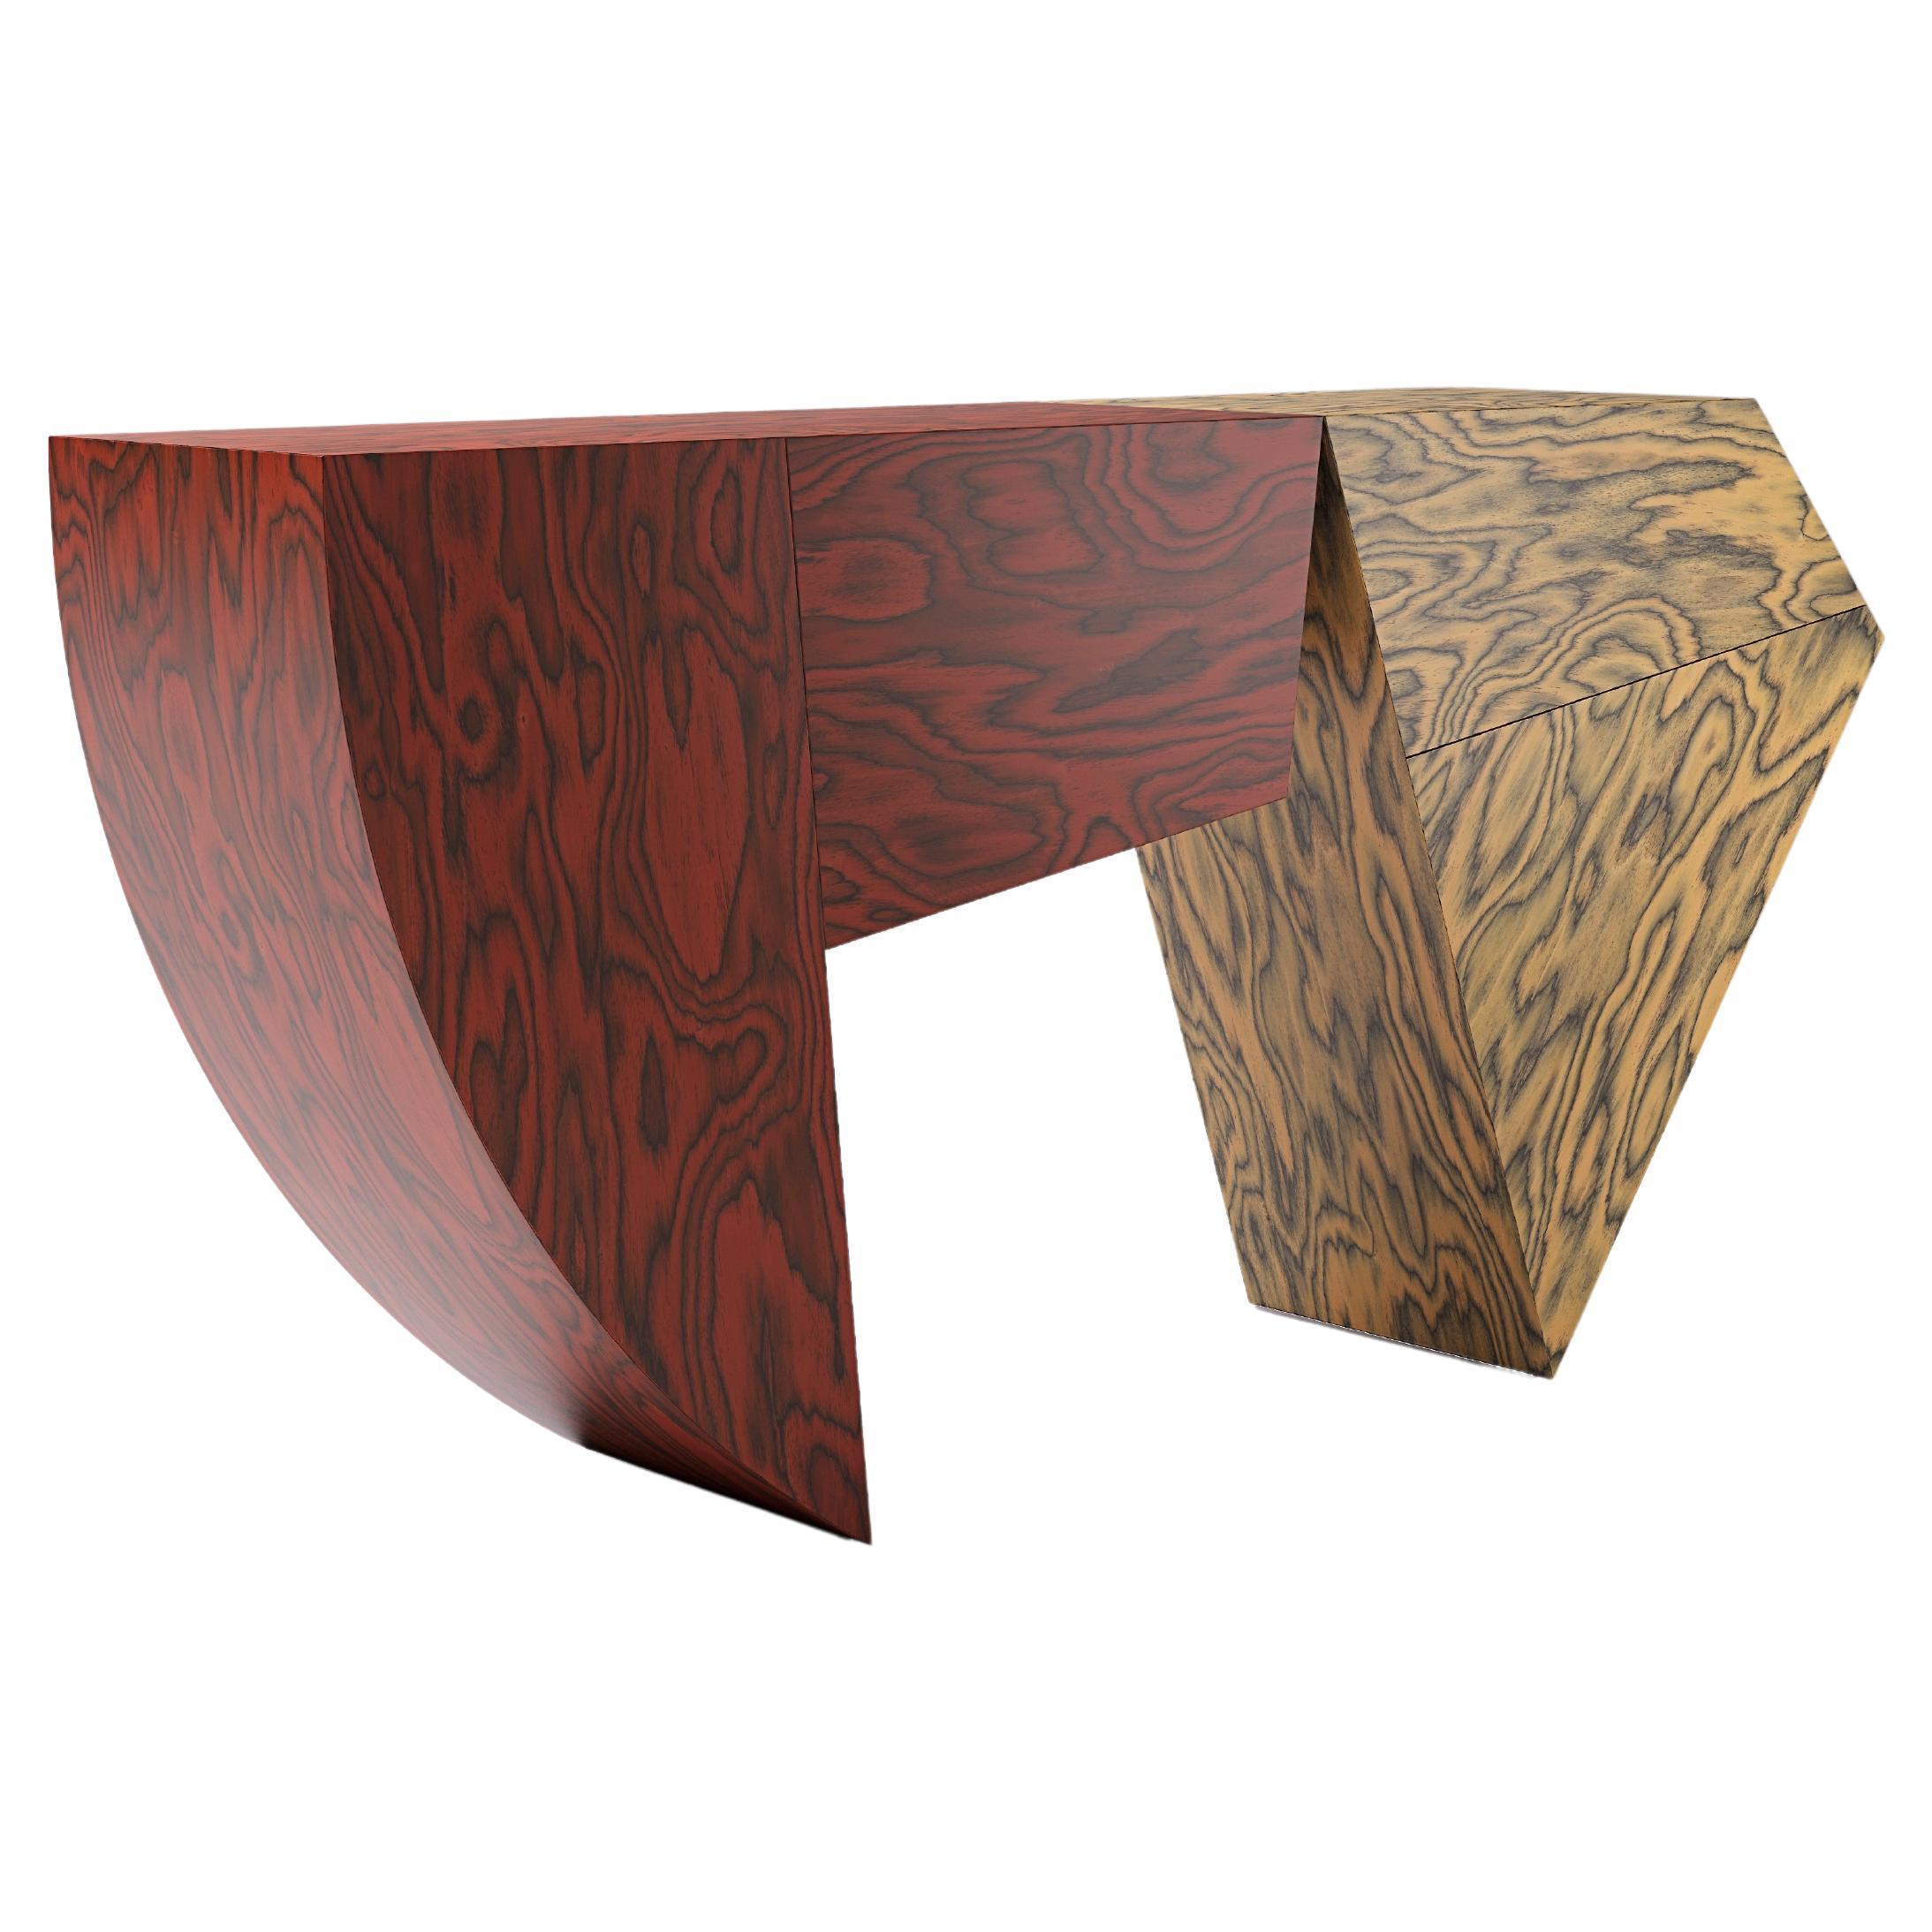 Lola sculptural curved wood sideboard by Sebastiano Bottos